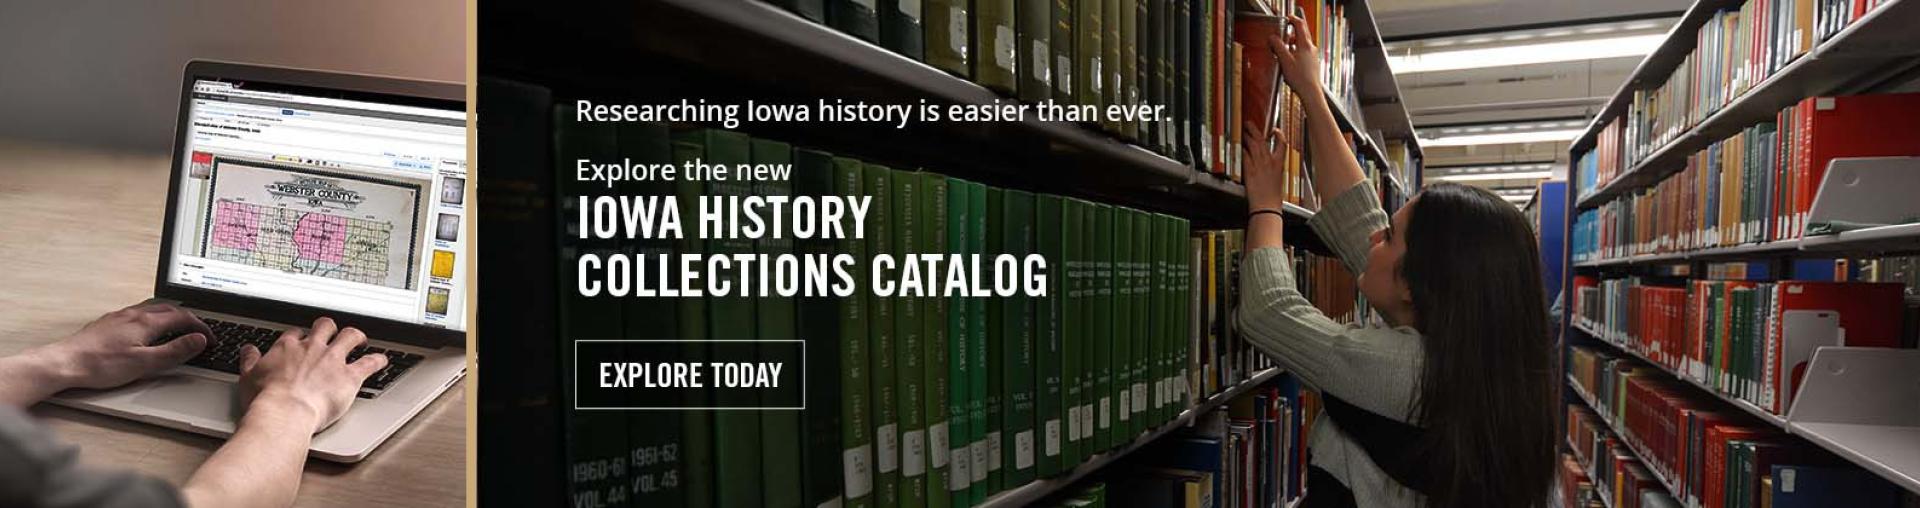 Iowa History Collections Catalog